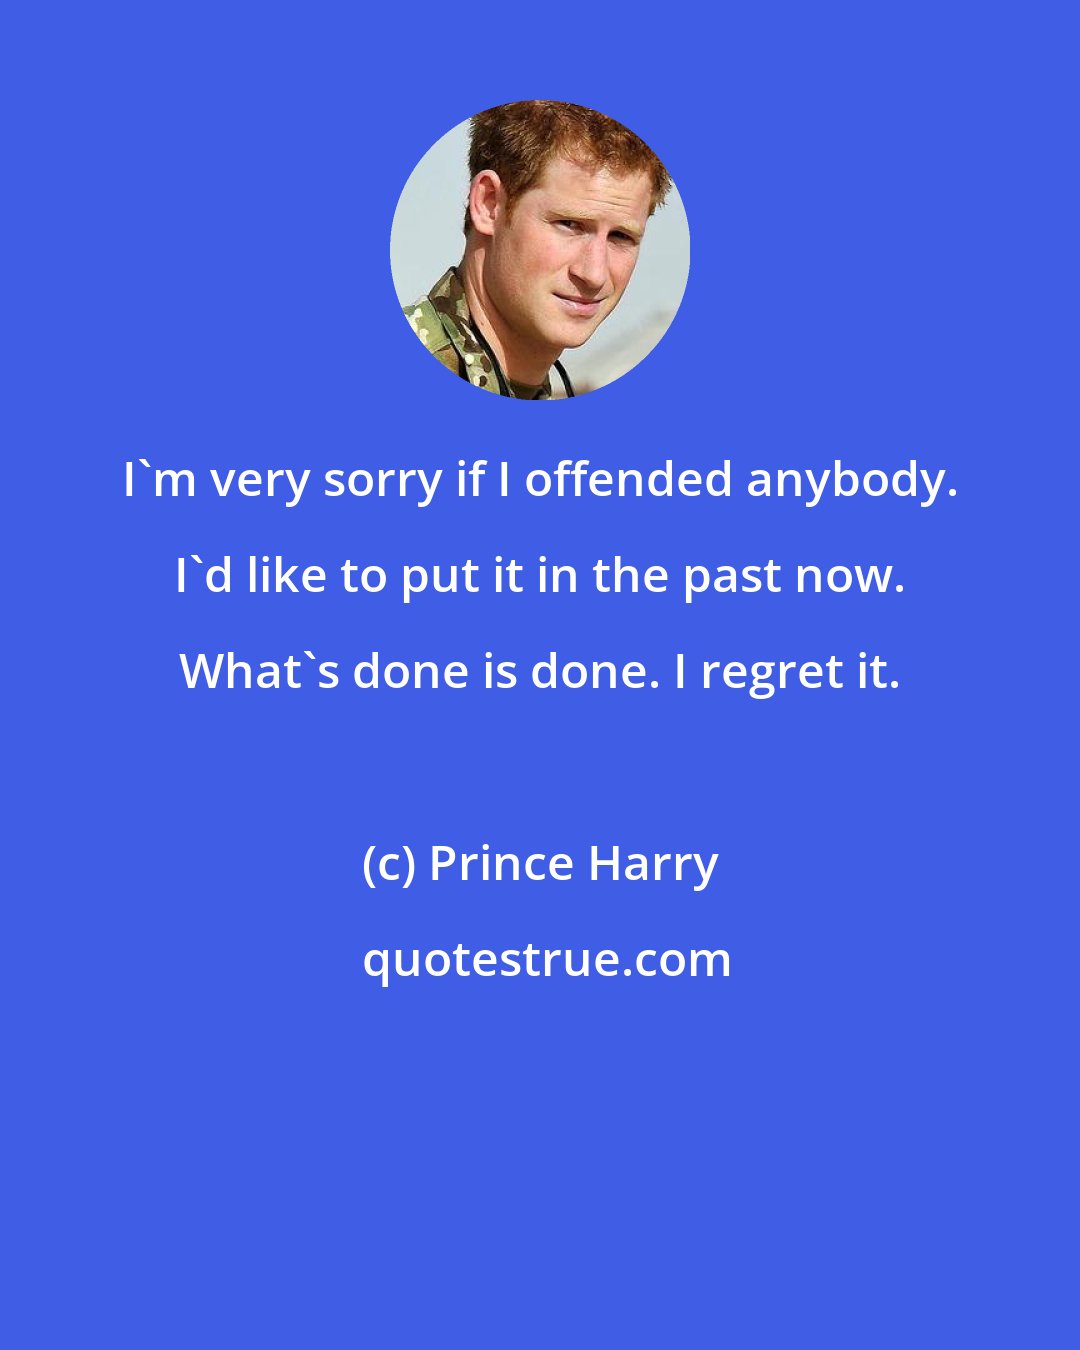 Prince Harry: I'm very sorry if I offended anybody. I'd like to put it in the past now. What's done is done. I regret it.